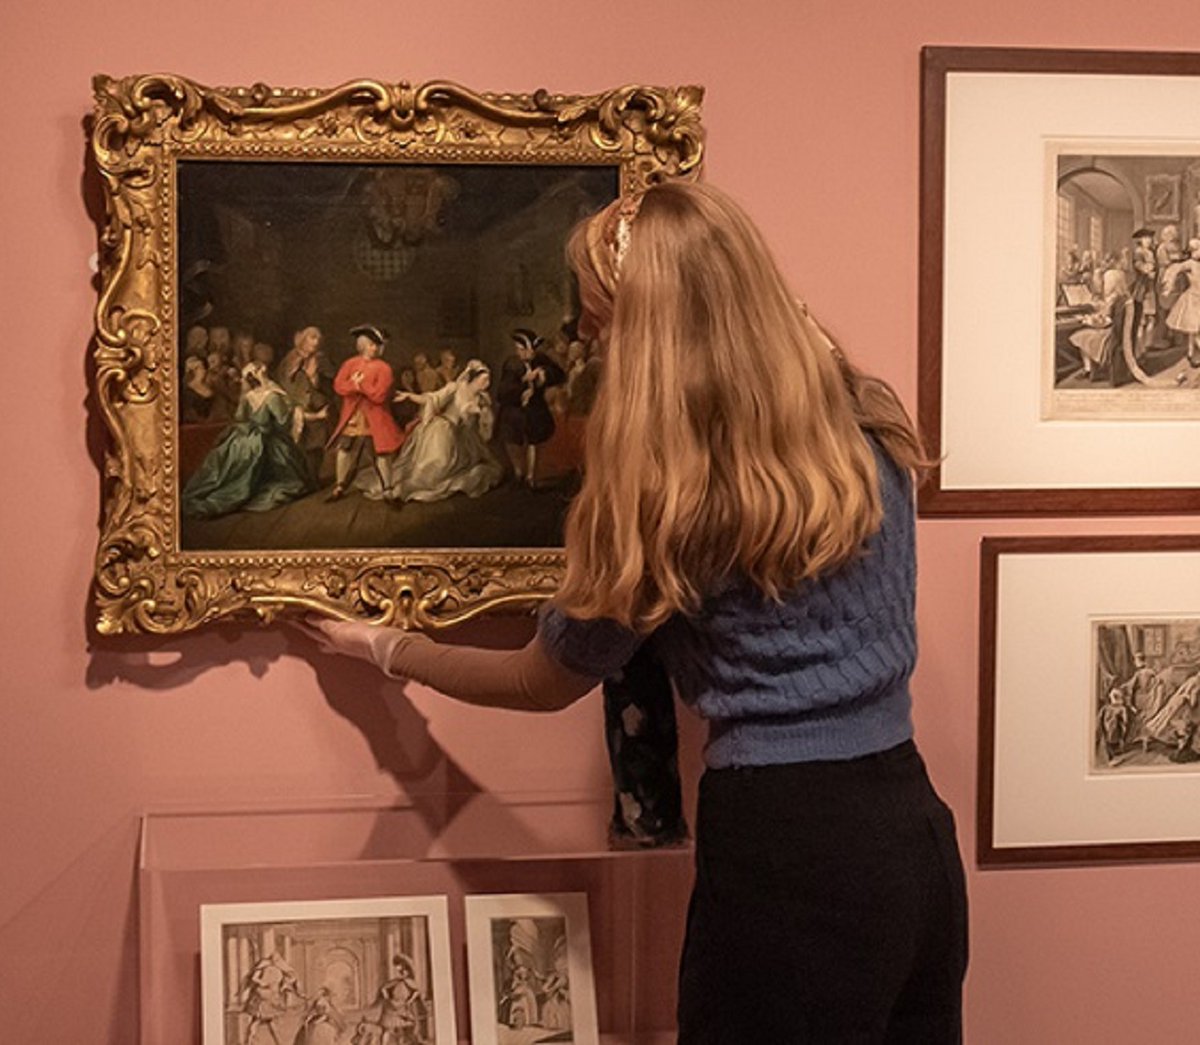 🎨🖌️Hogarth’s Britons

📍@derbymuseums 
📅 Until 4 June

Don’t miss your chance to see these magnificent, often satirical, works from William Hogarth & his contemporaries!

Find out more here ⬇️
ow.ly/cS0h50Ozffu

#DerbyUK #hogarth